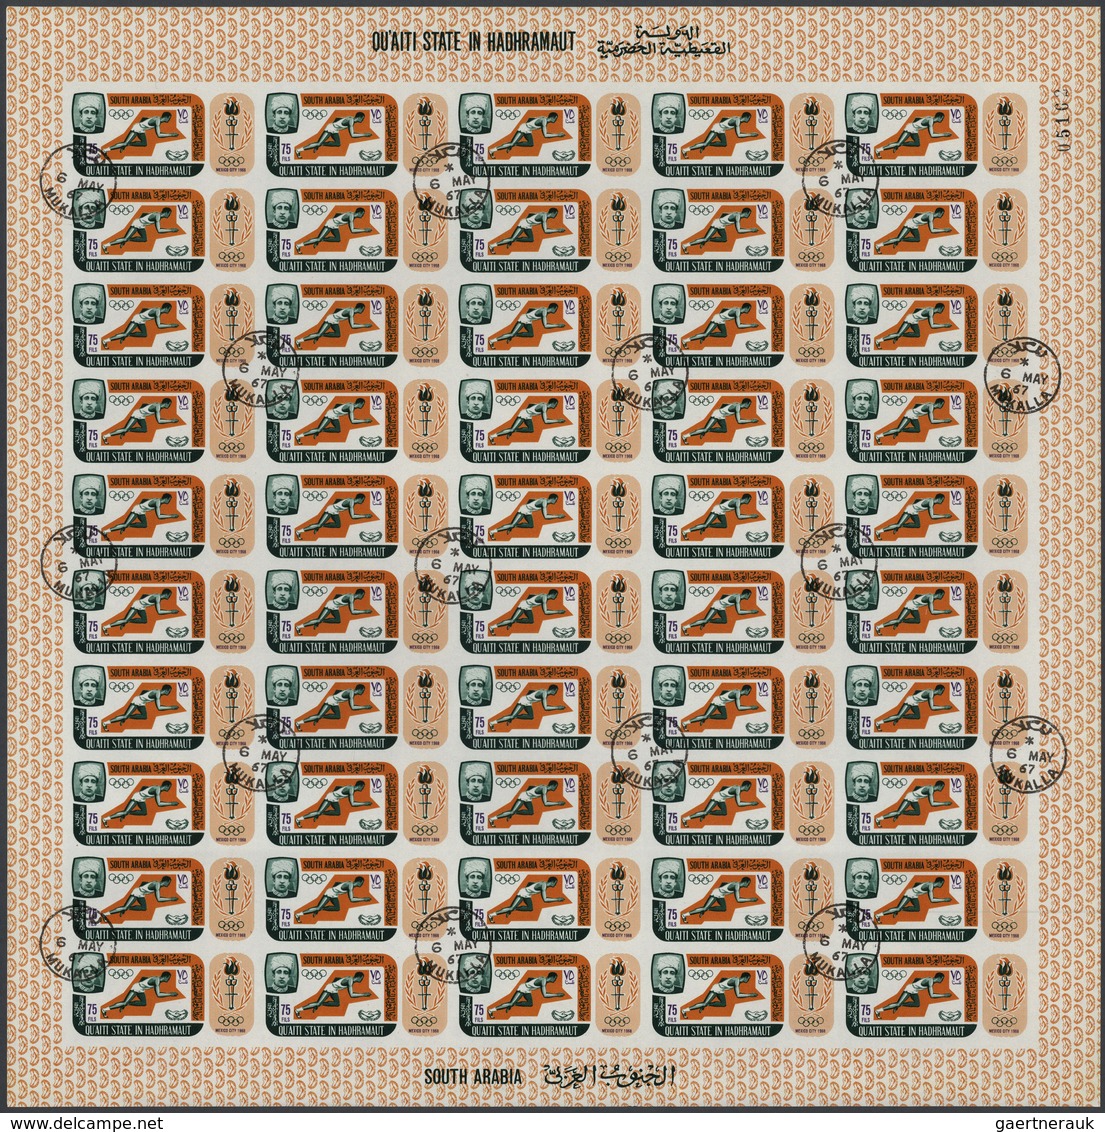 Aden - Qu'aiti State In Hadhramaut: 1967, 75f. Olympic Games Mexico '68, Accumulation Of 6.950 Stamp - Yemen